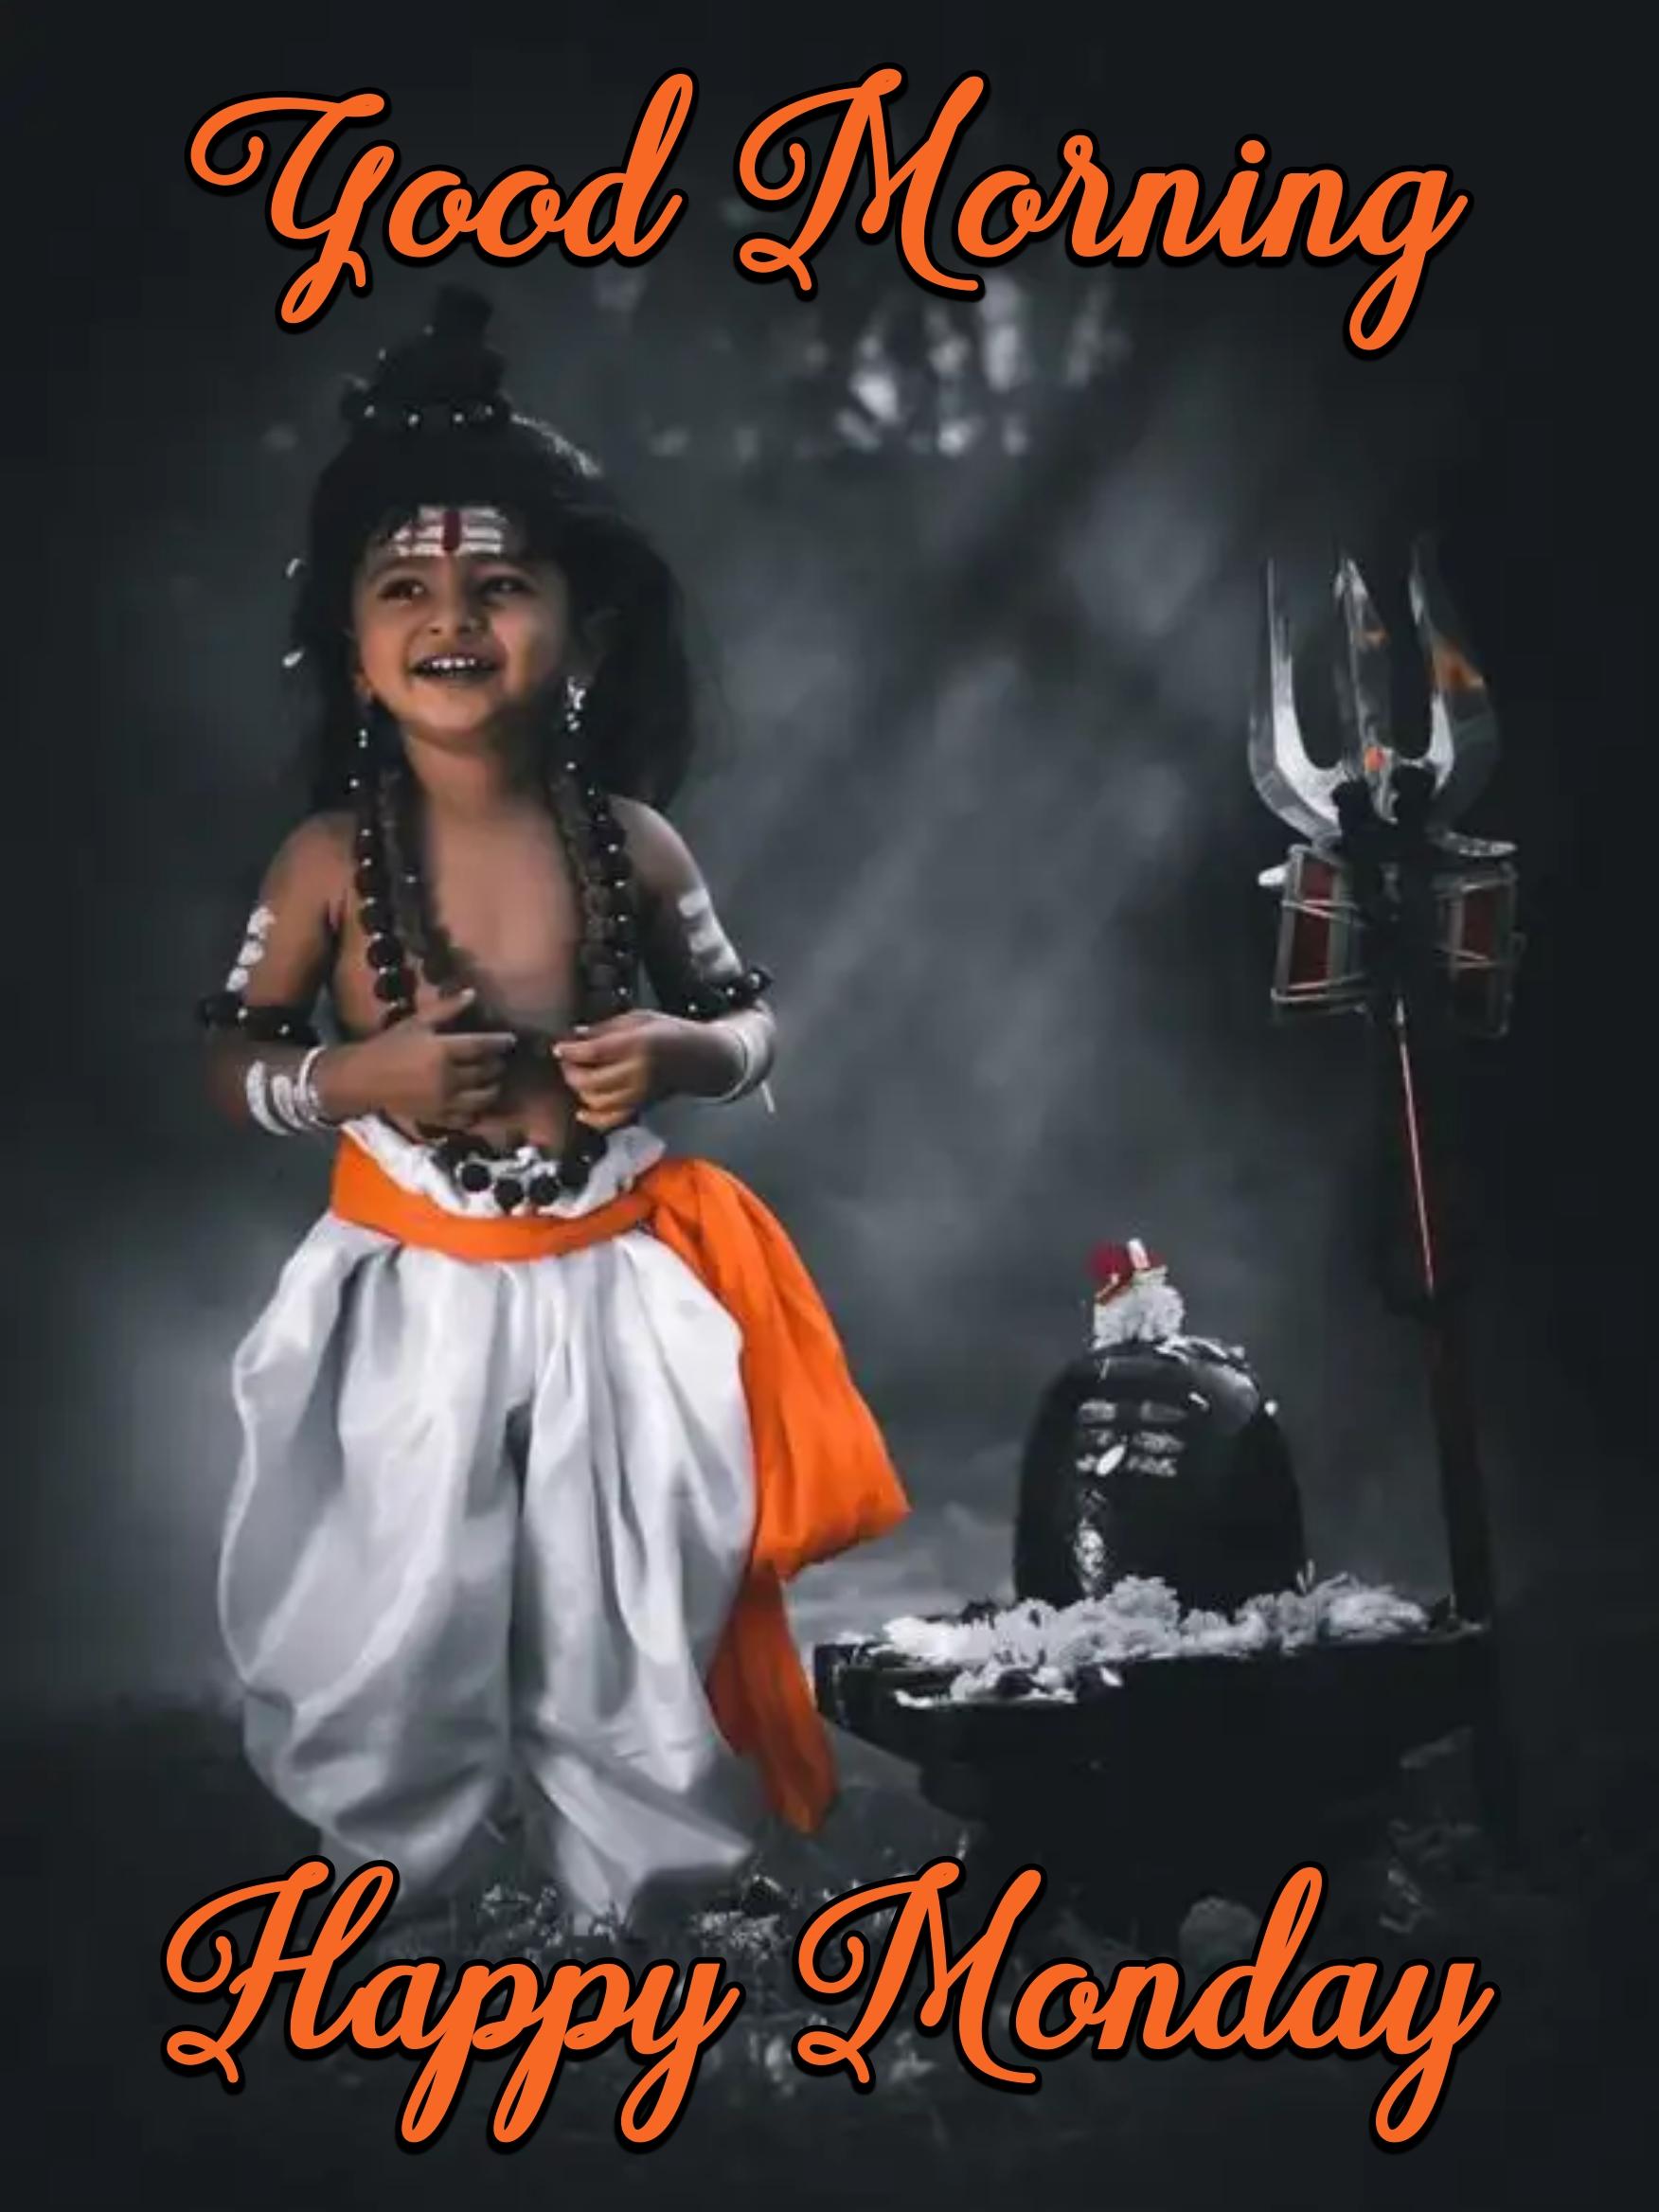 Good Morning Monday Shiv Cute Kid Images